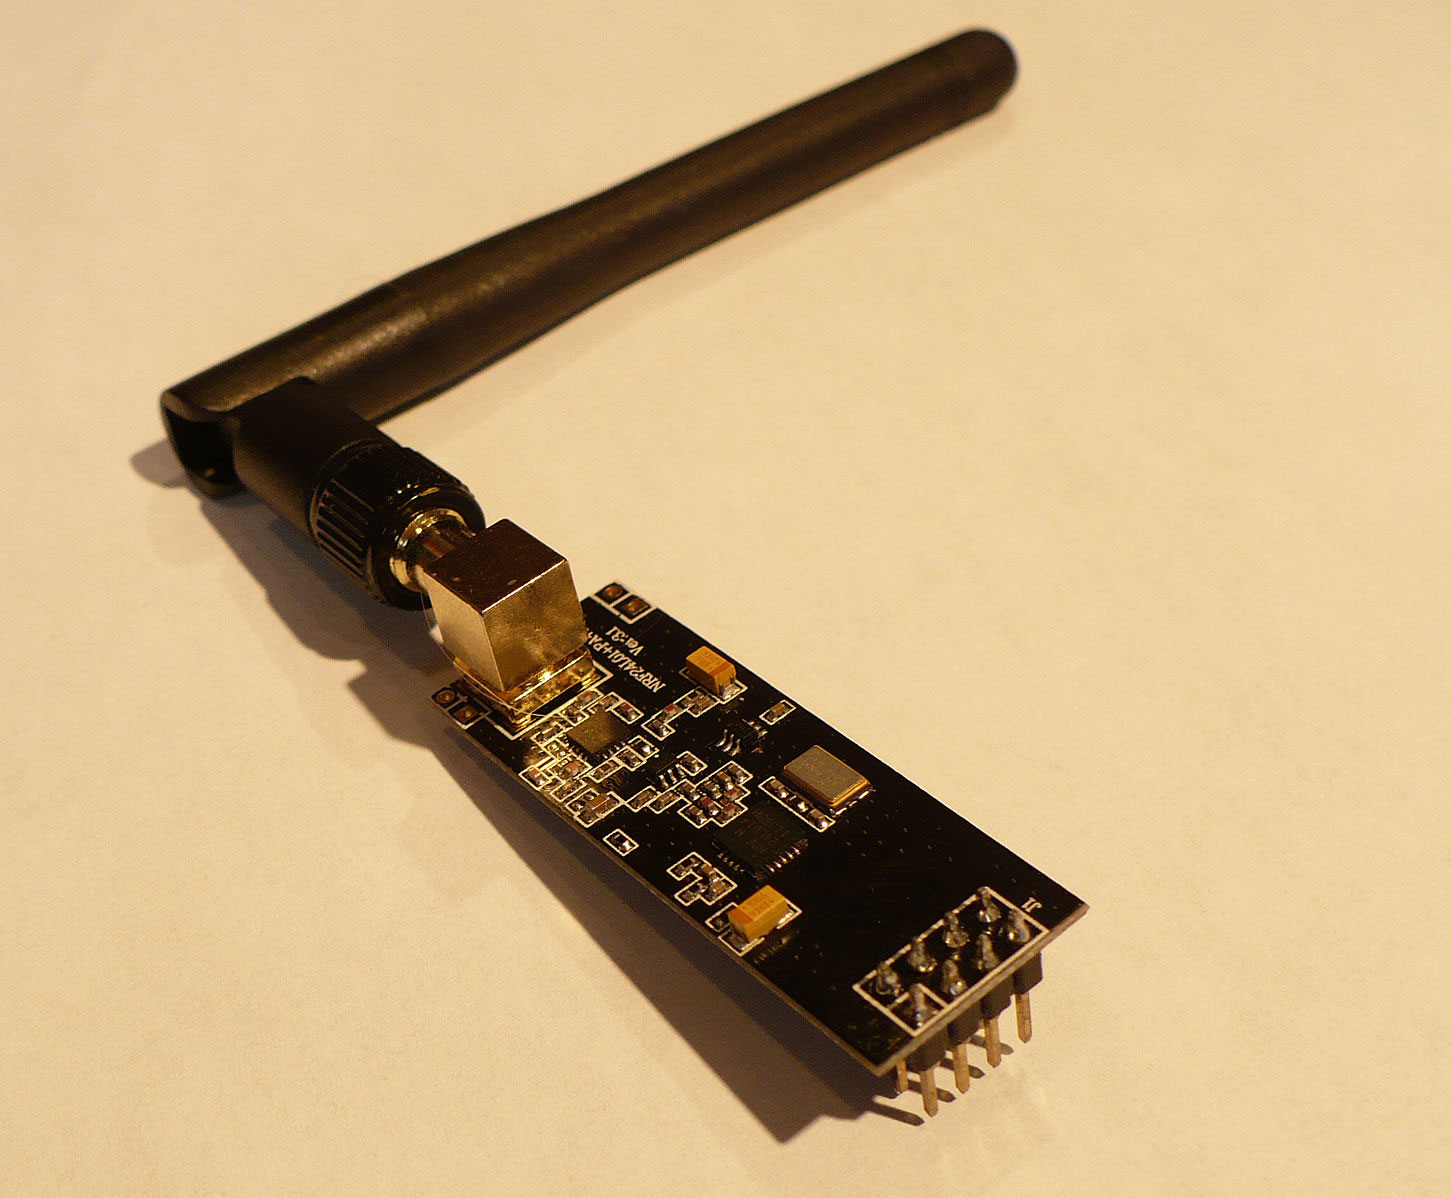 An nRF24L01 wireless module. Note the duck antenna is connected via the SMA connector.